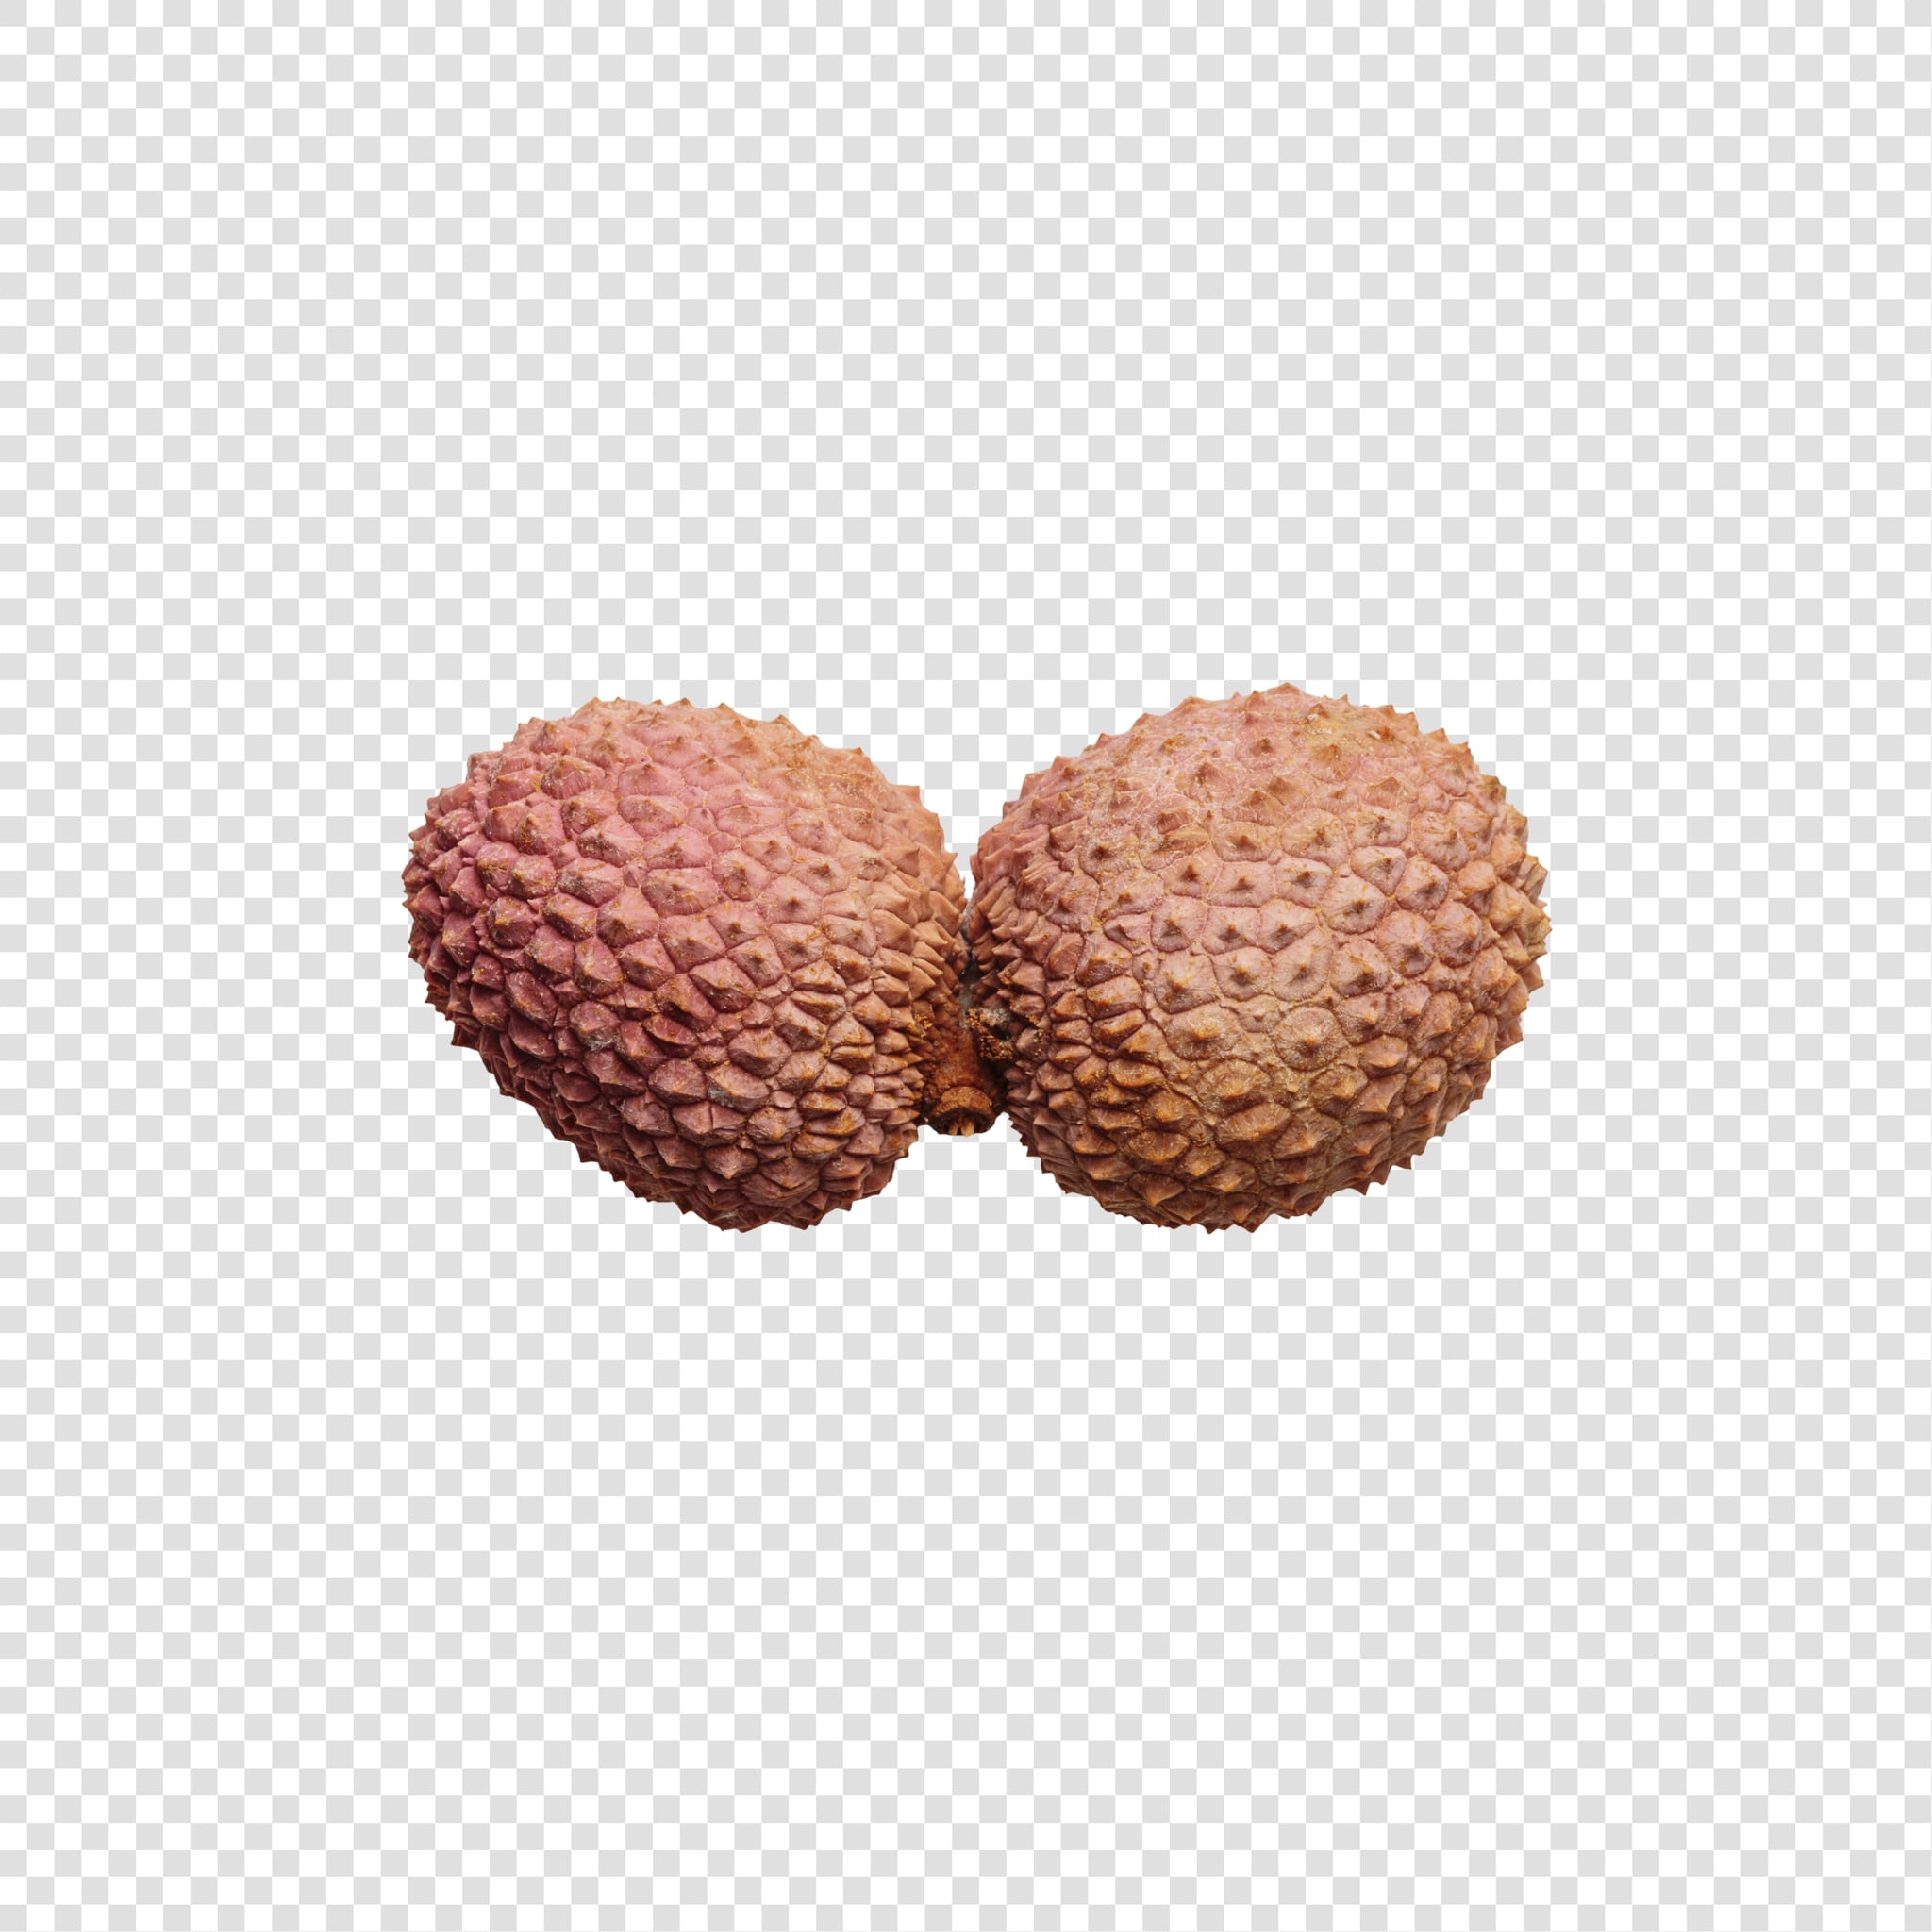 Lychee PSD image with transparent background